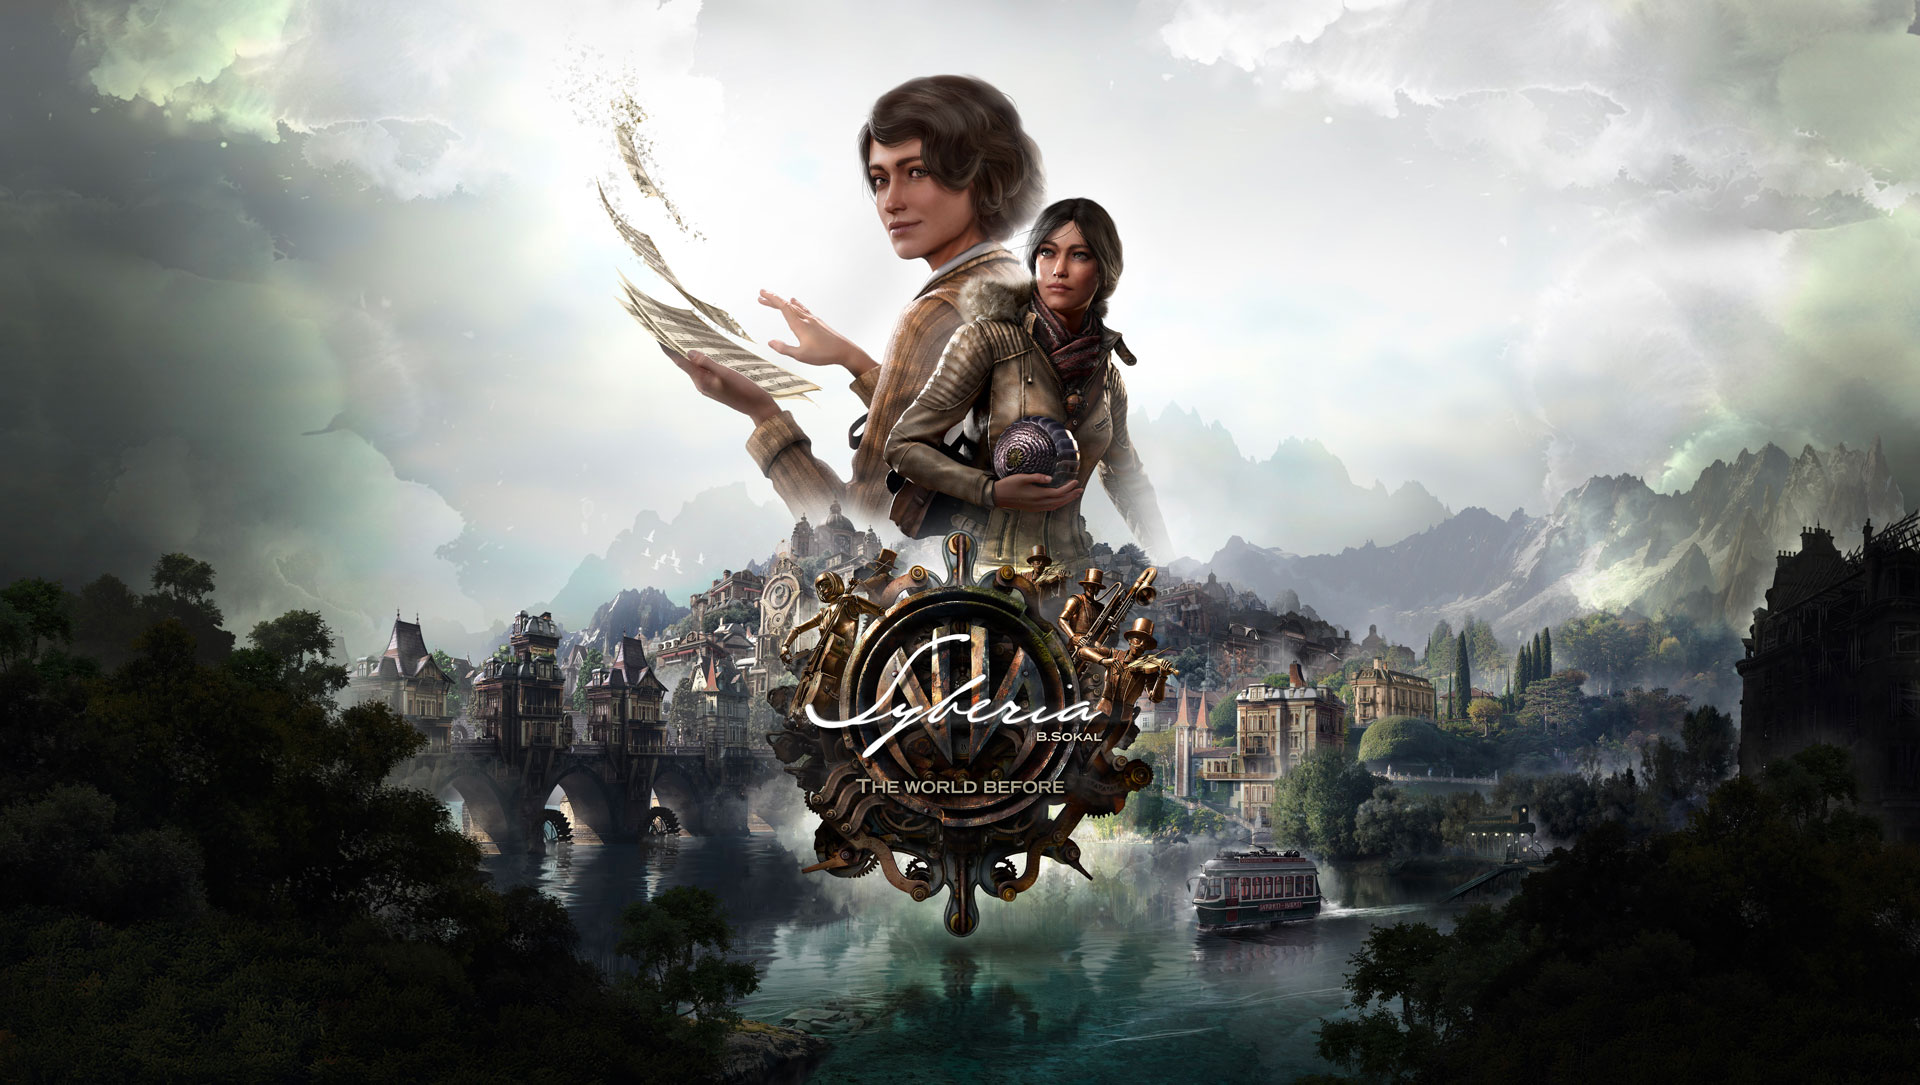 Syberia The World Before 11 21 2022 ១